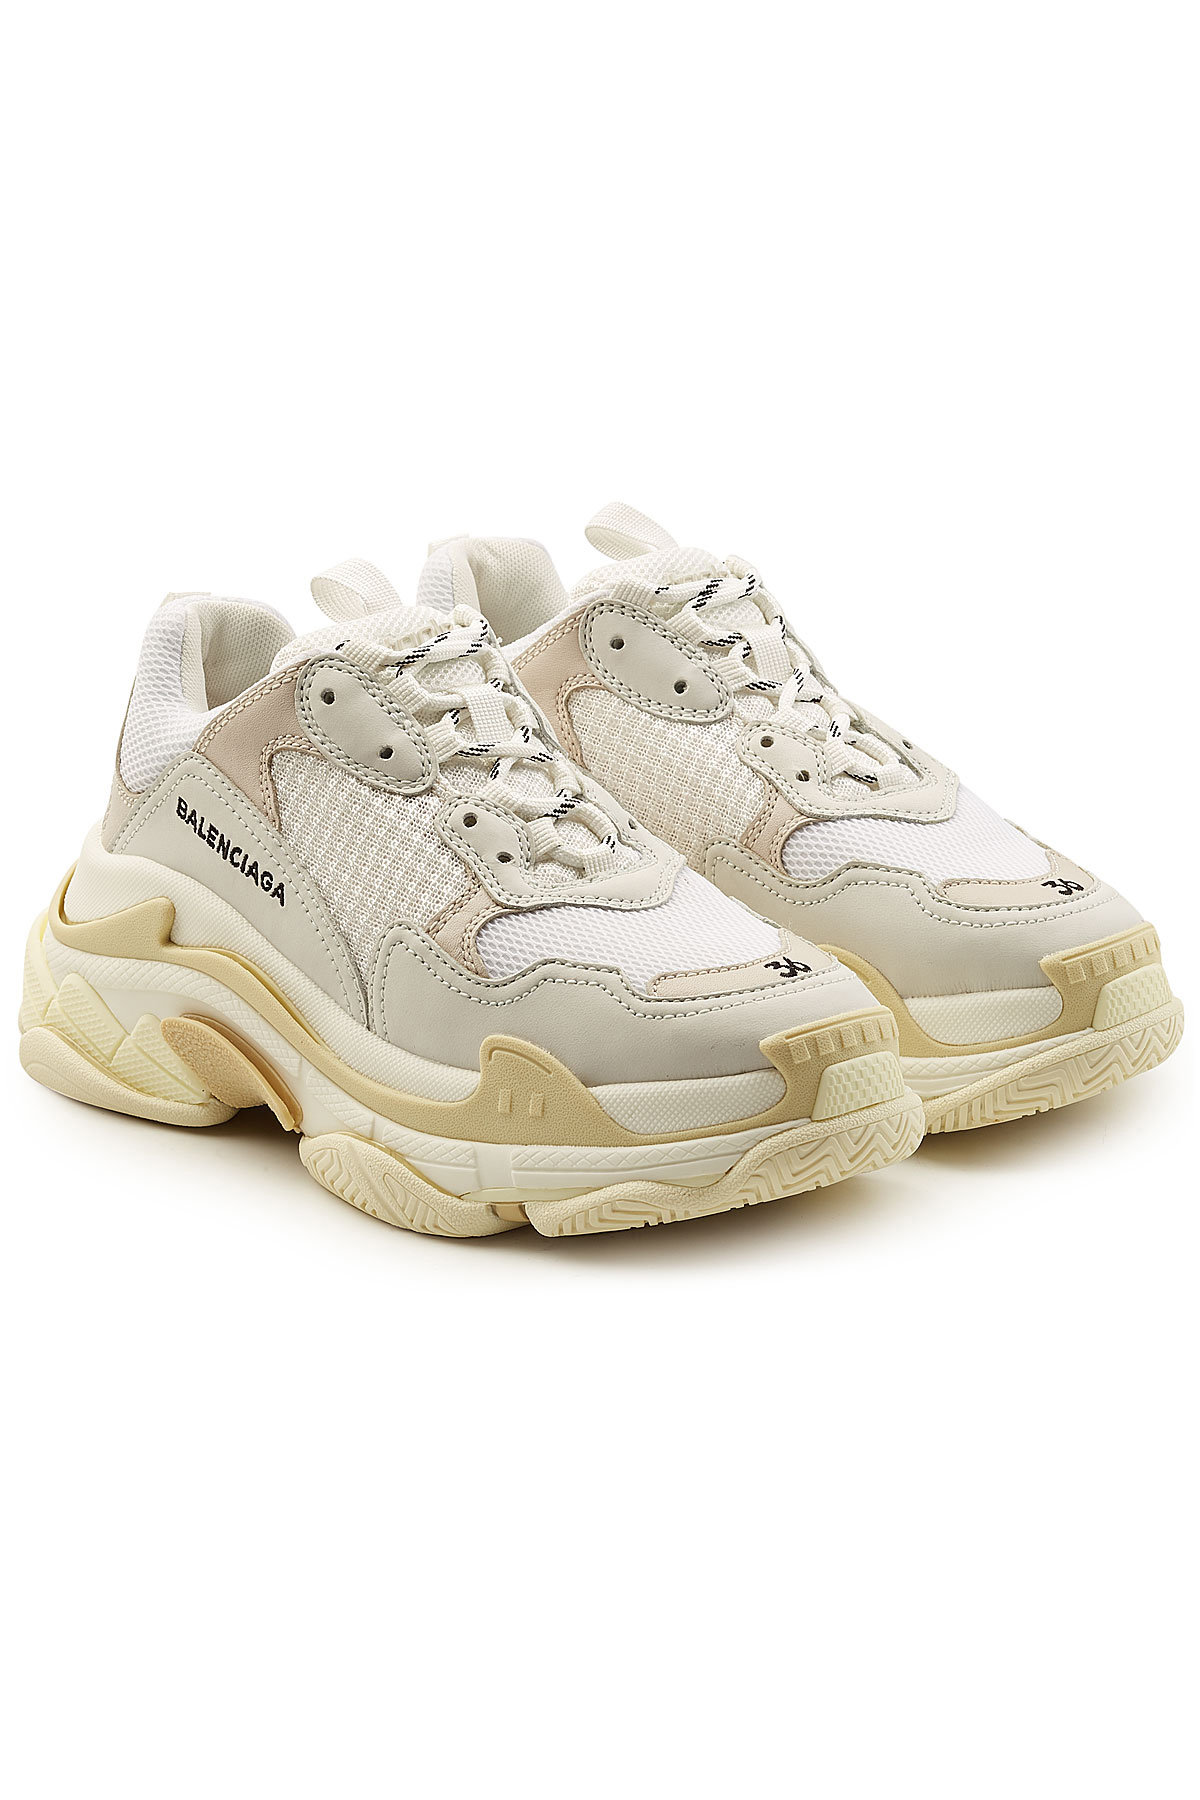 Balenciaga - Triple S Sneakers with Leather